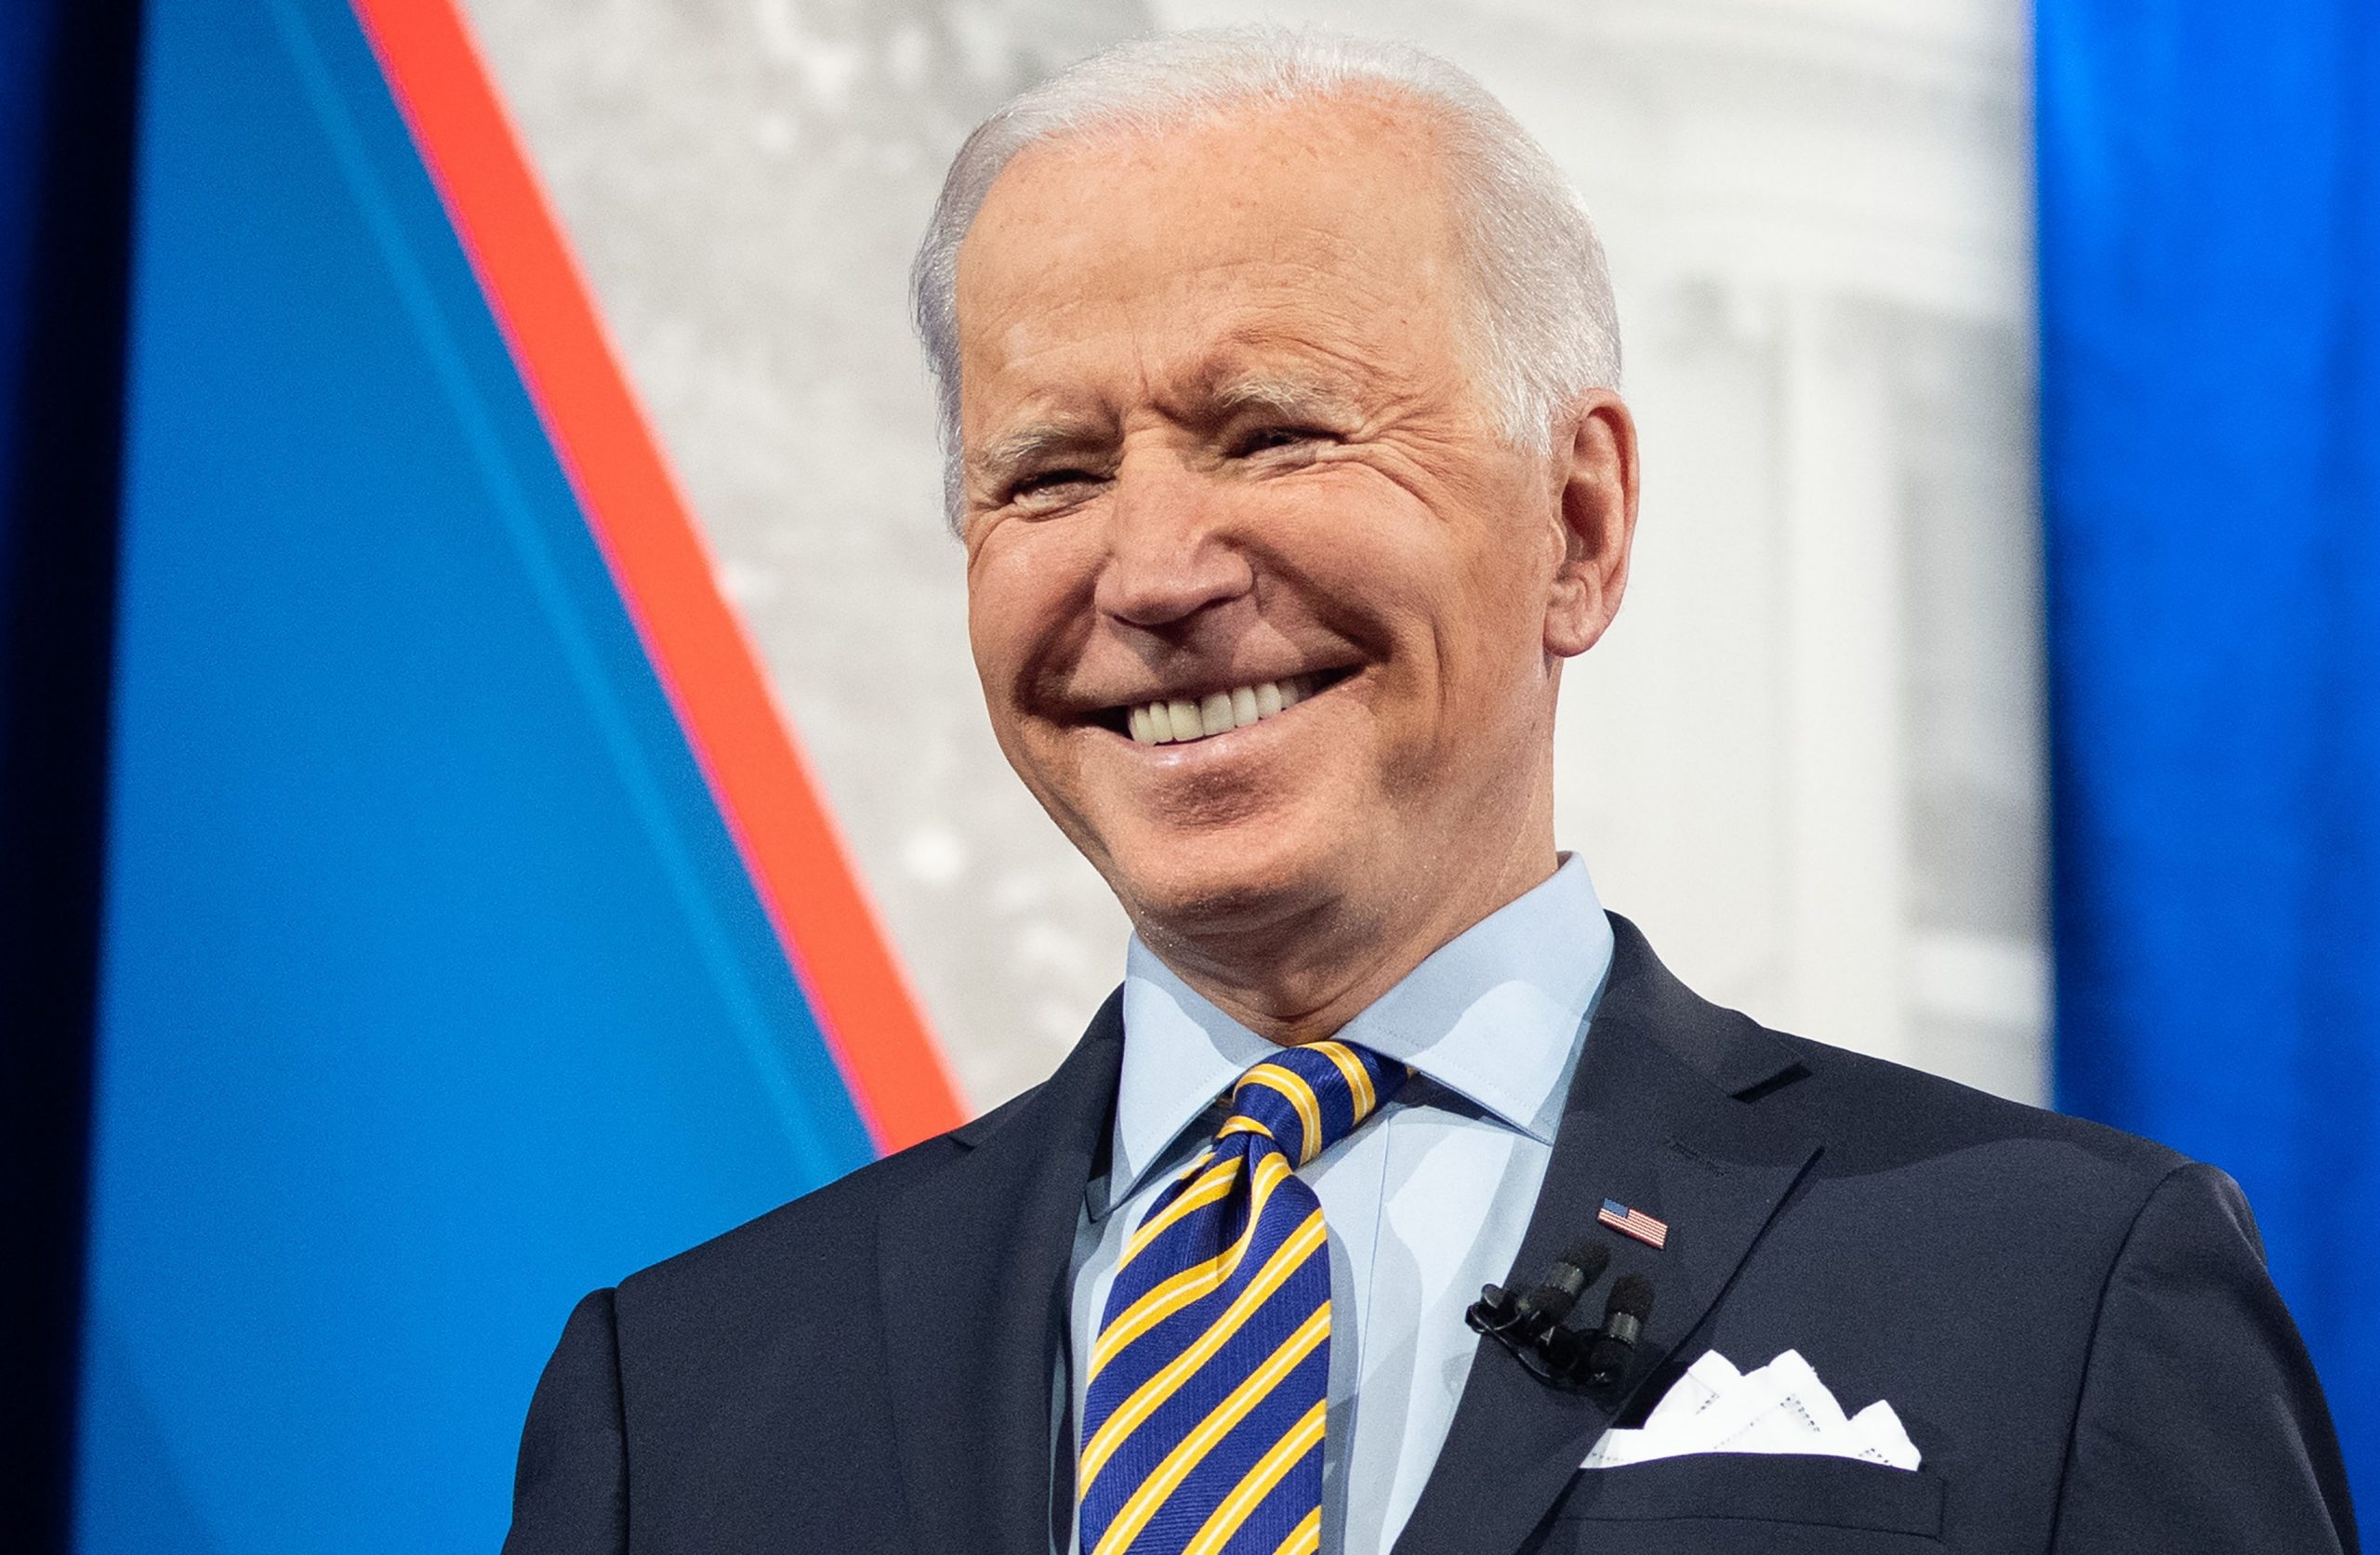 Biden: China’s Genocide of Uighurs Just Different ‘Norms’